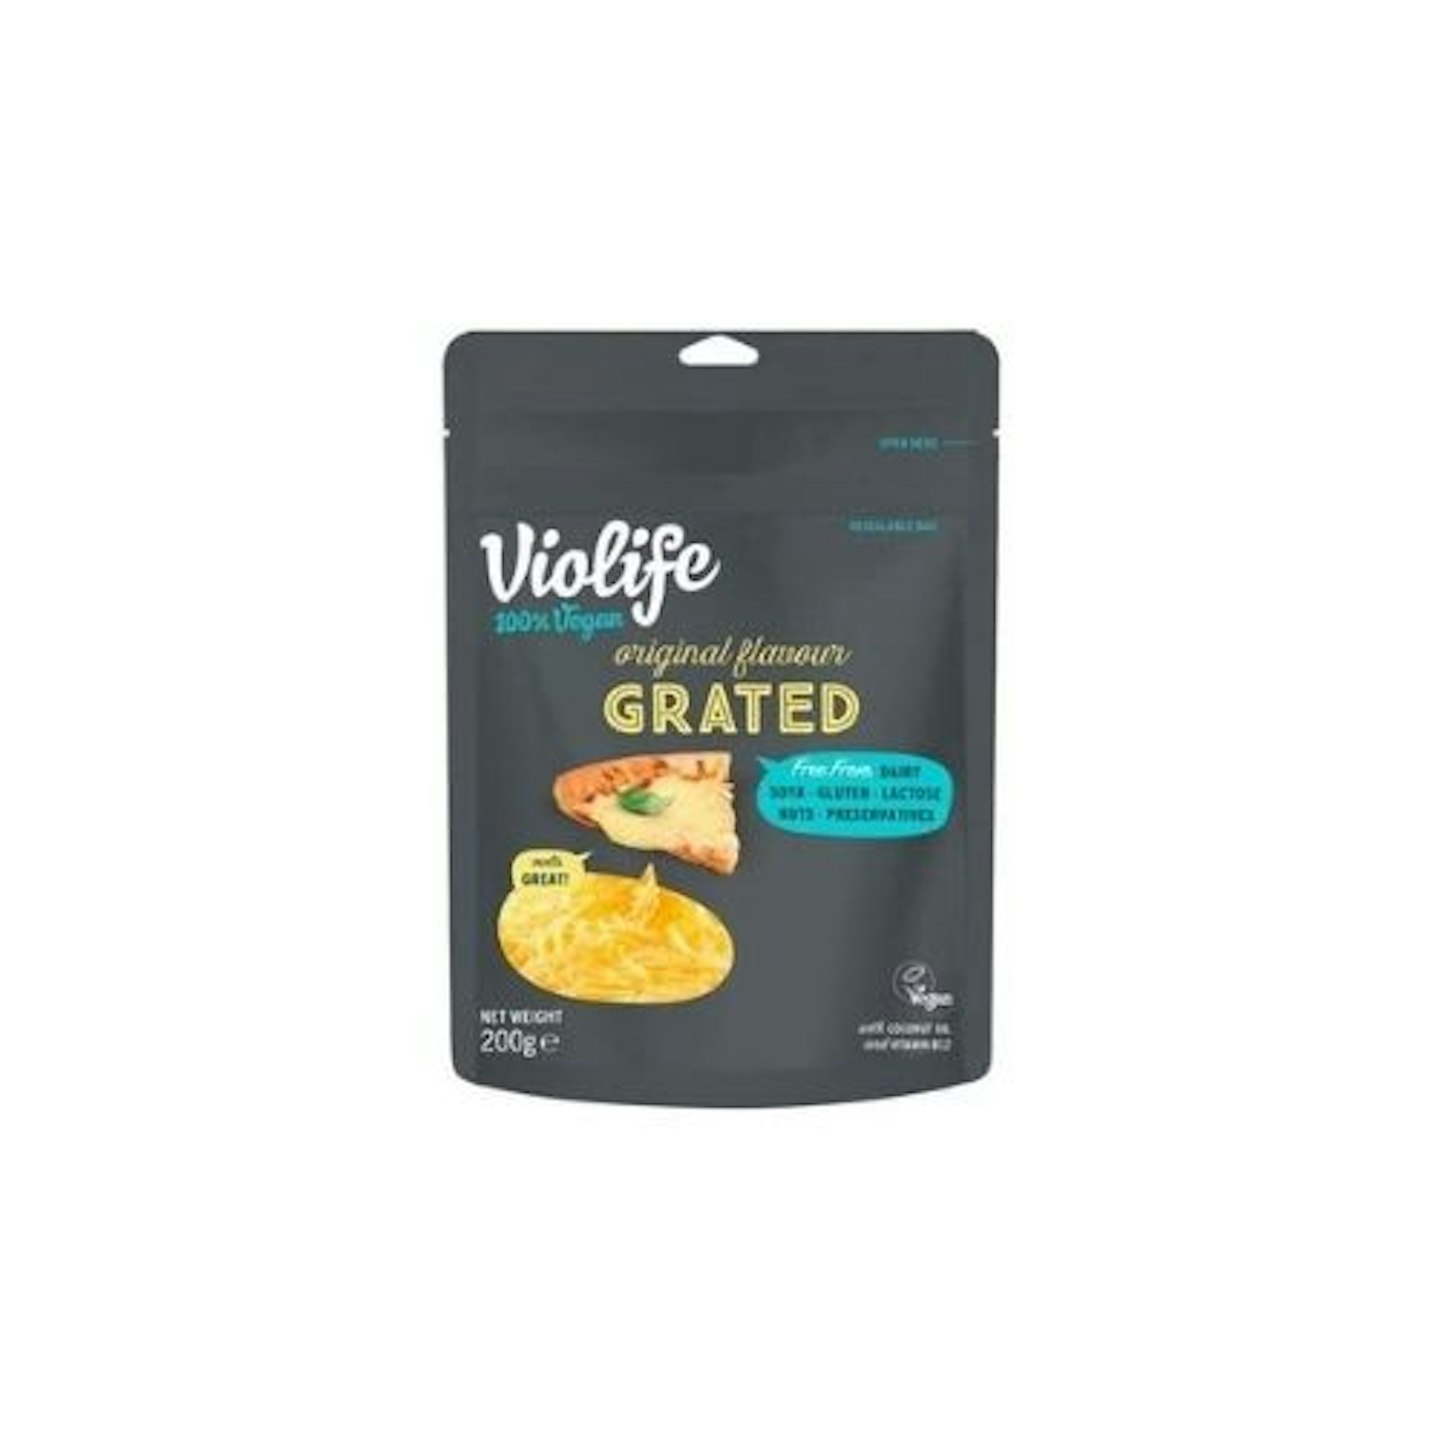 Violife Original Flavour Grated Cheese